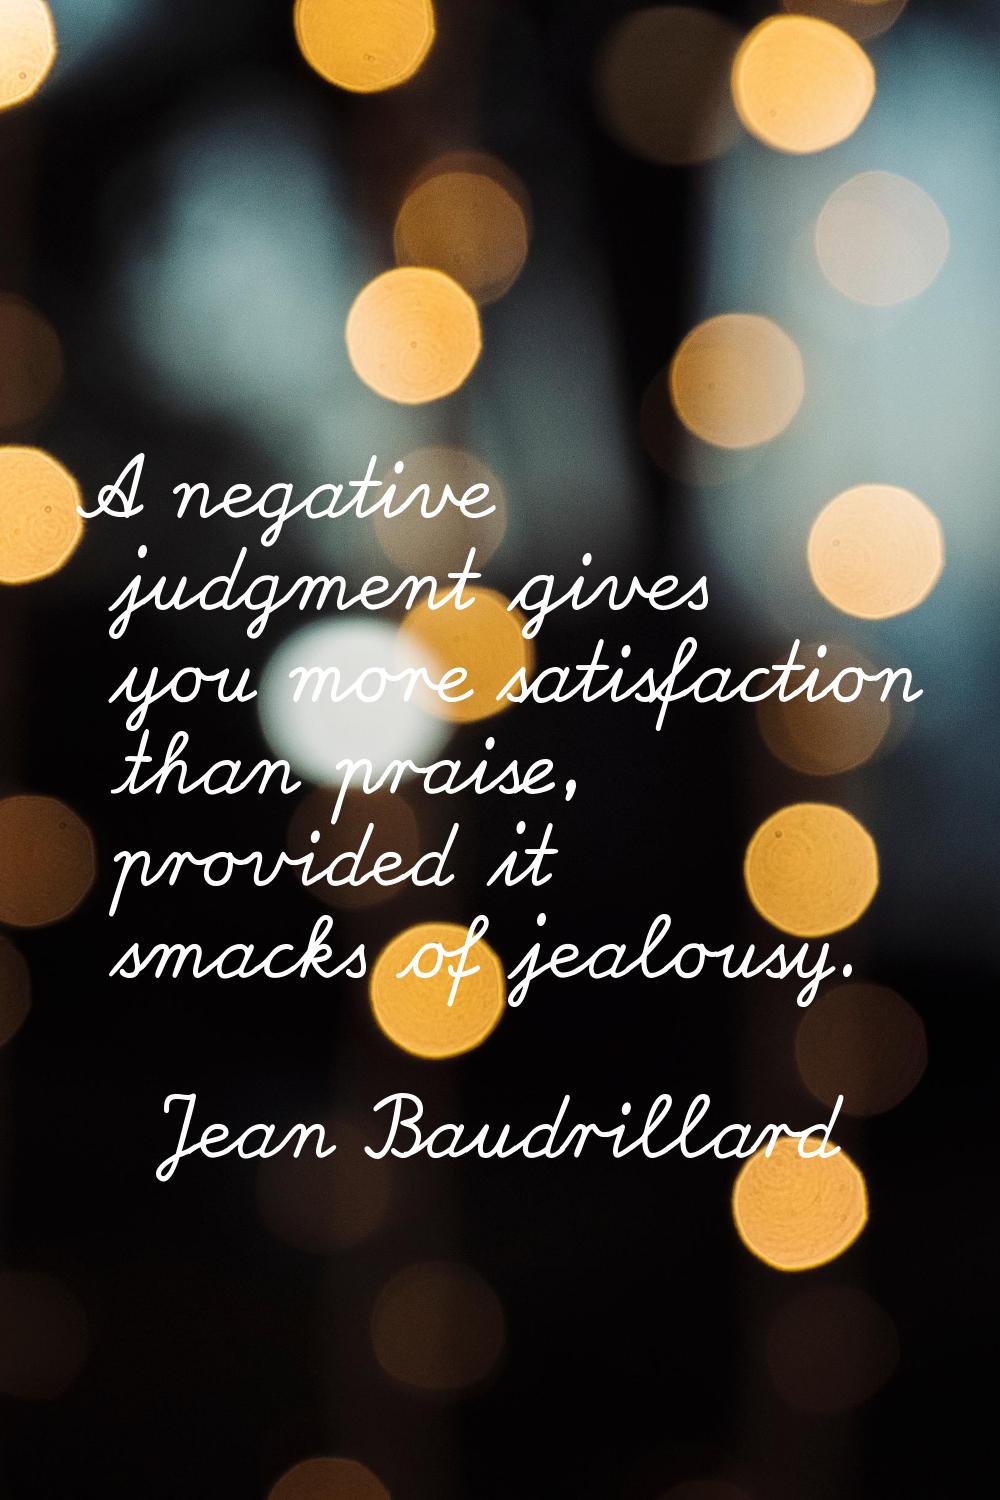 A negative judgment gives you more satisfaction than praise, provided it smacks of jealousy.